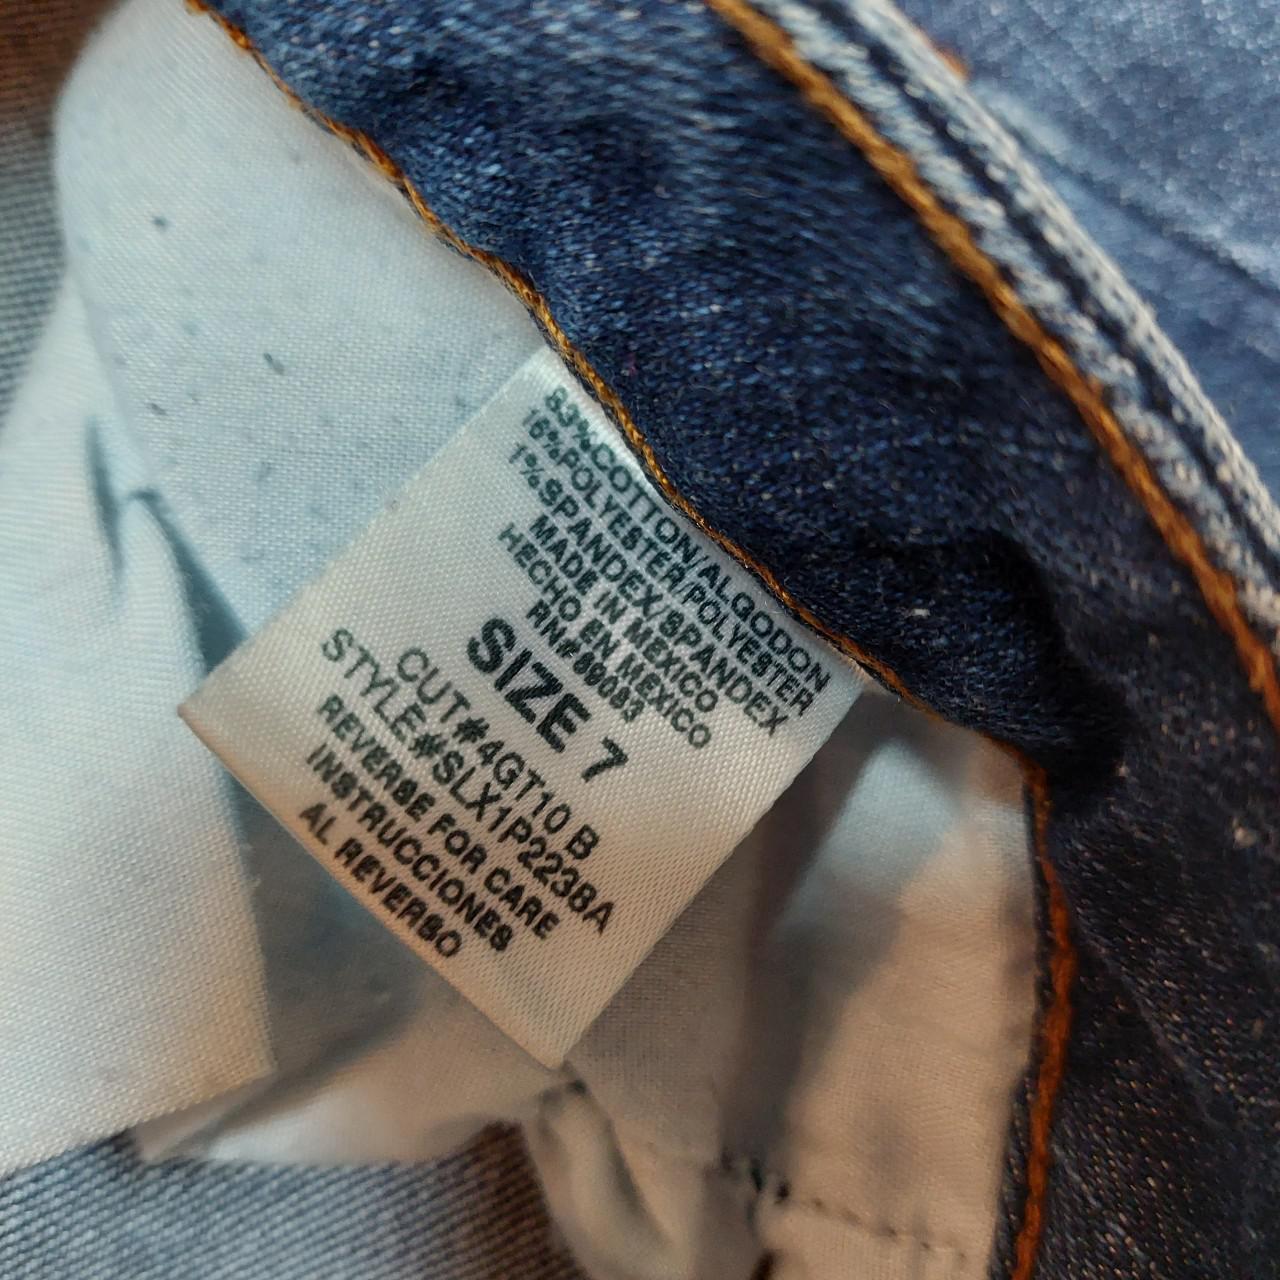 Product Image 4 - Y2k l.e.i. Jeans
Manufacturer distressing around